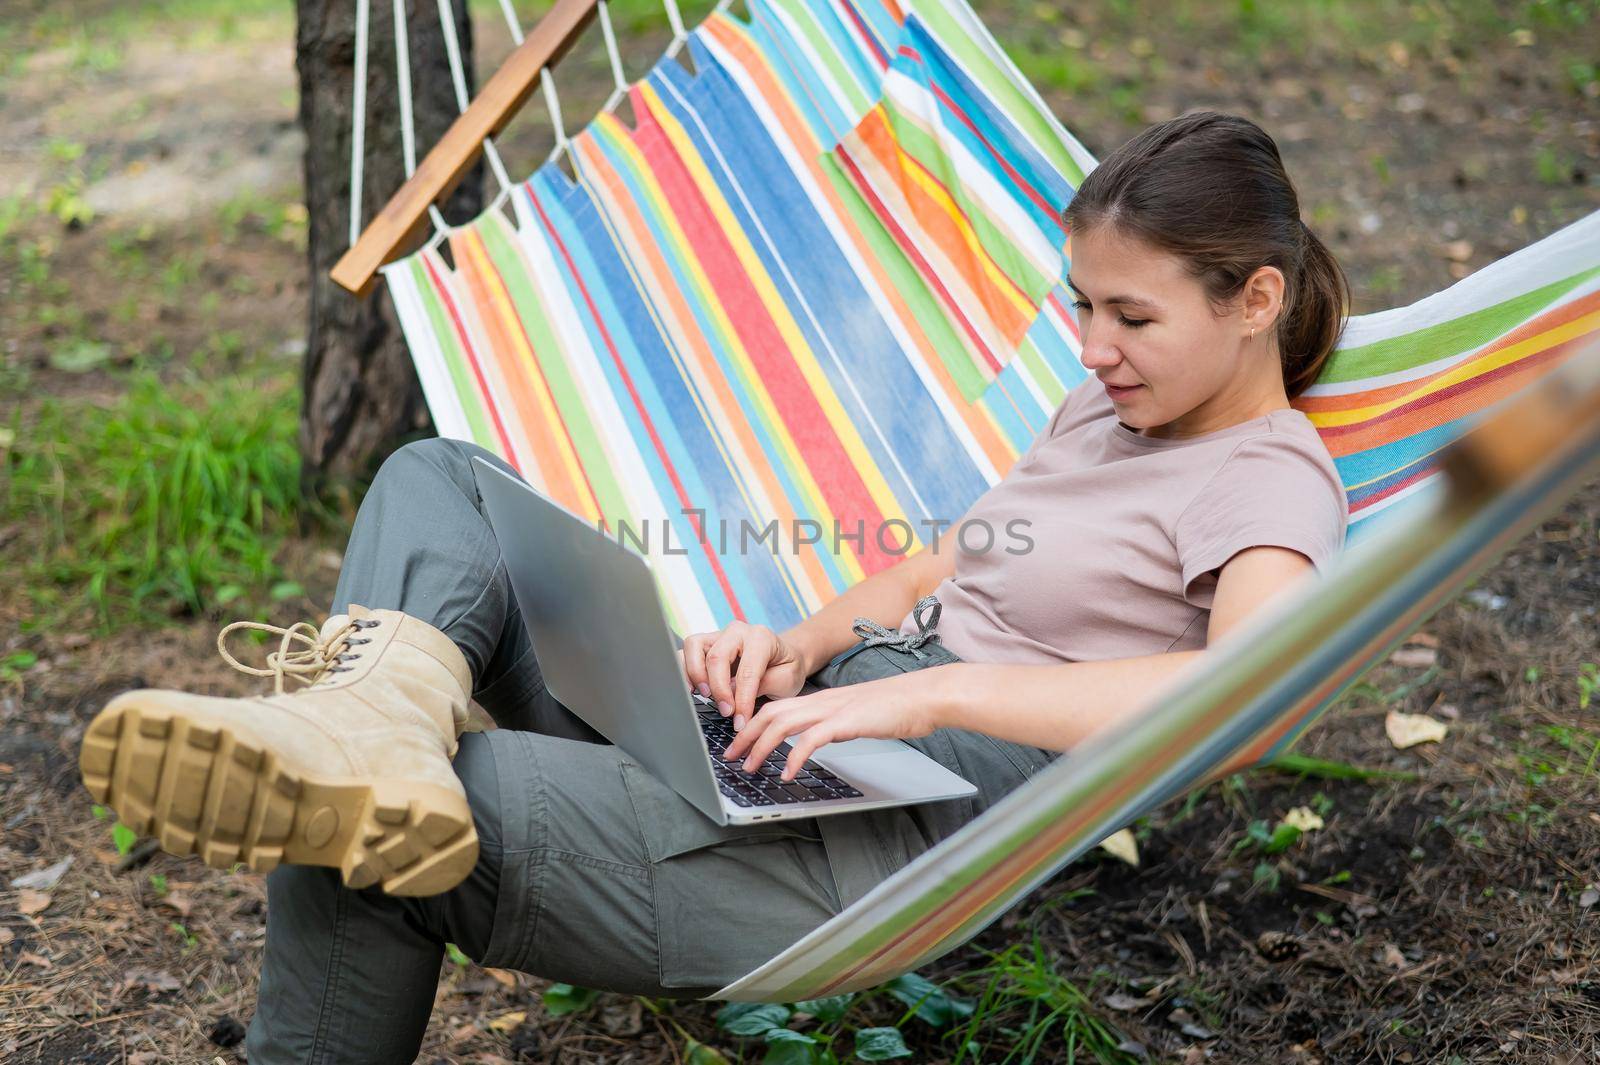 Caucasian woman working on laptop while sitting in a hammock in the forest. Girl uses a wireless computer on a hike